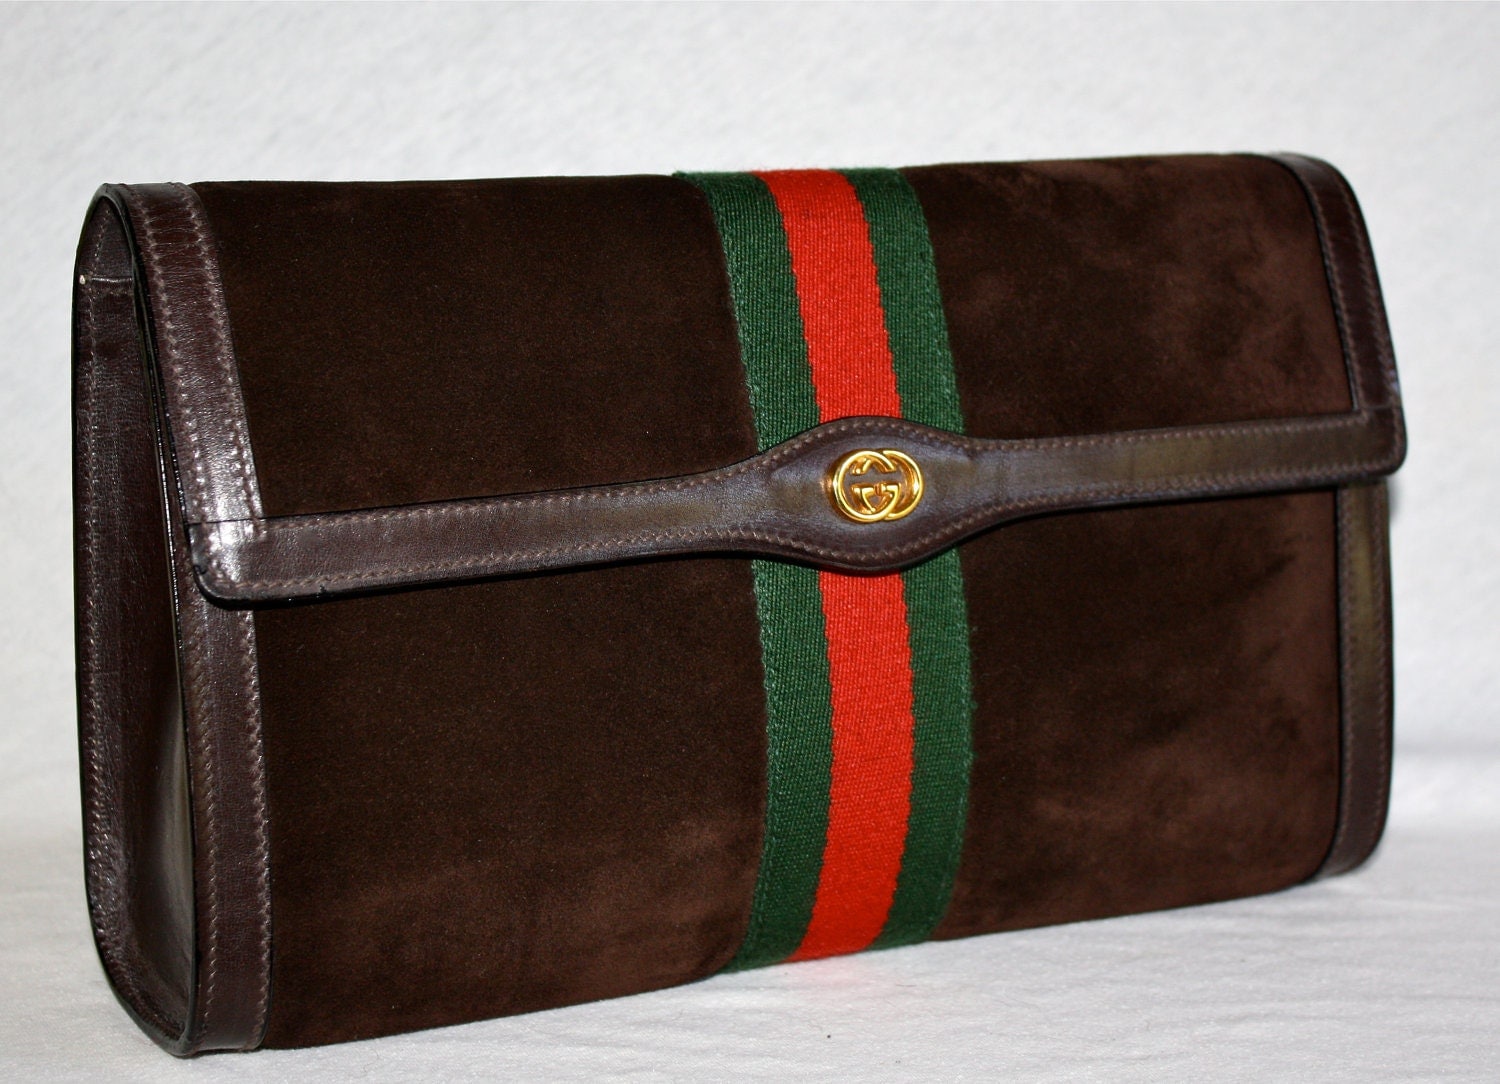 VINTAGE GUCCI Clutch Brown Suede Large Web Stripe by StatedStyle